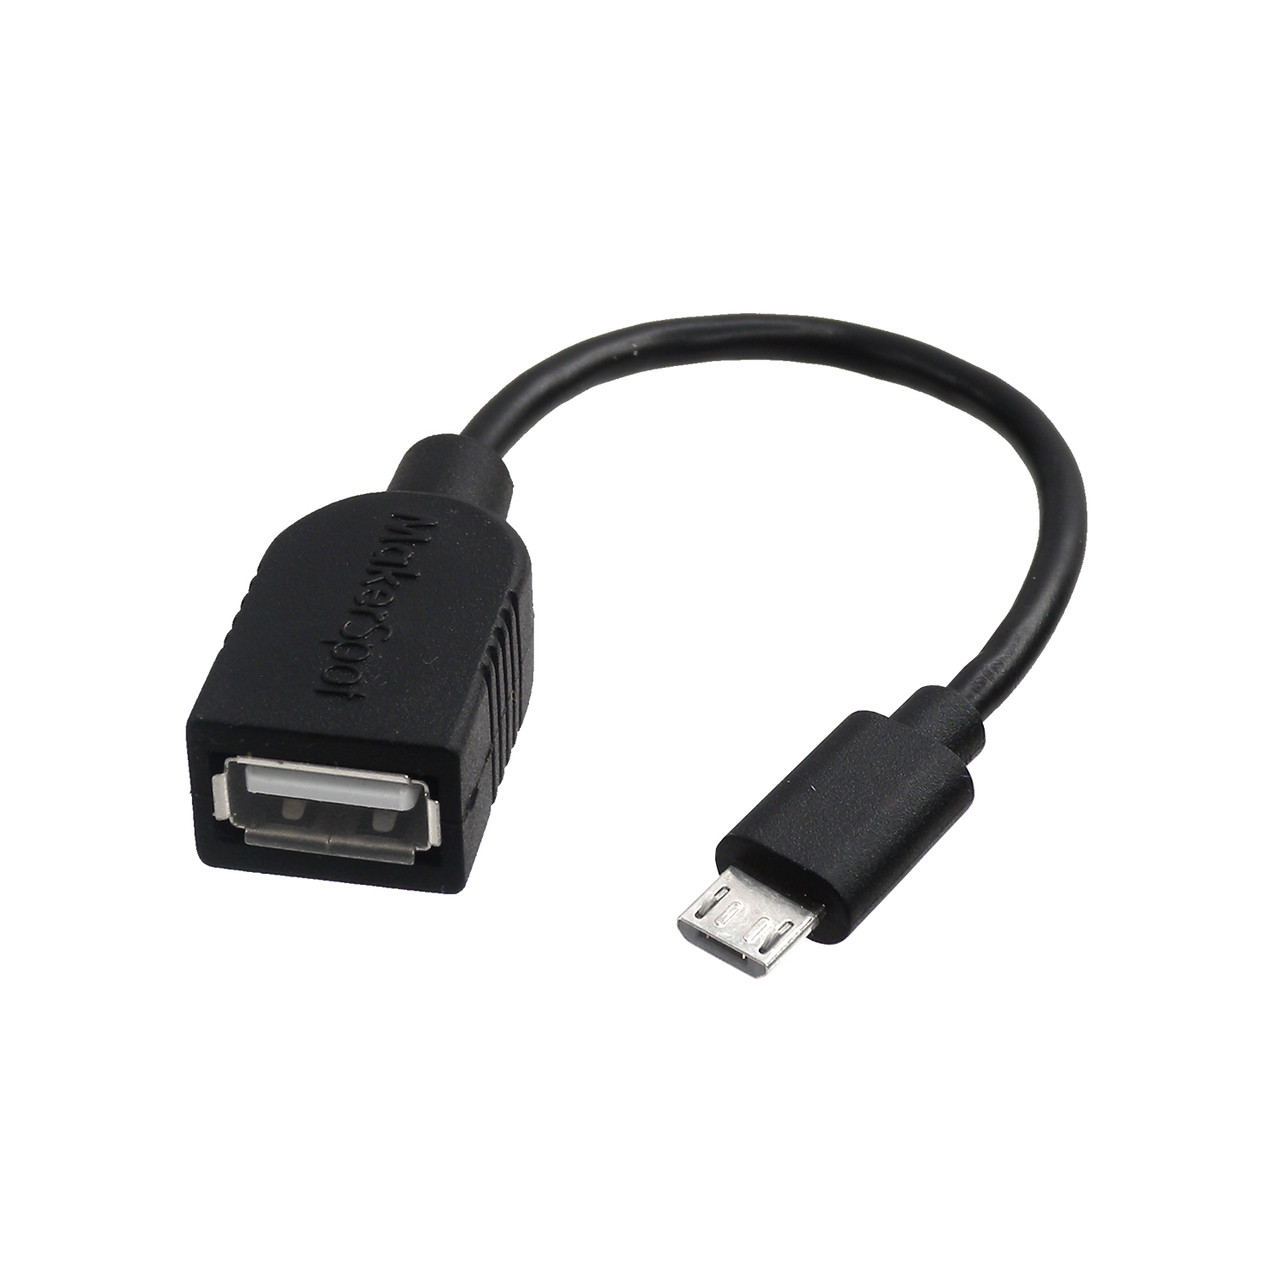 Black Micro USB to OTG Works with Zen Mobile M8 Direct On-The-Go Connection Kit and Cable Adapter! 